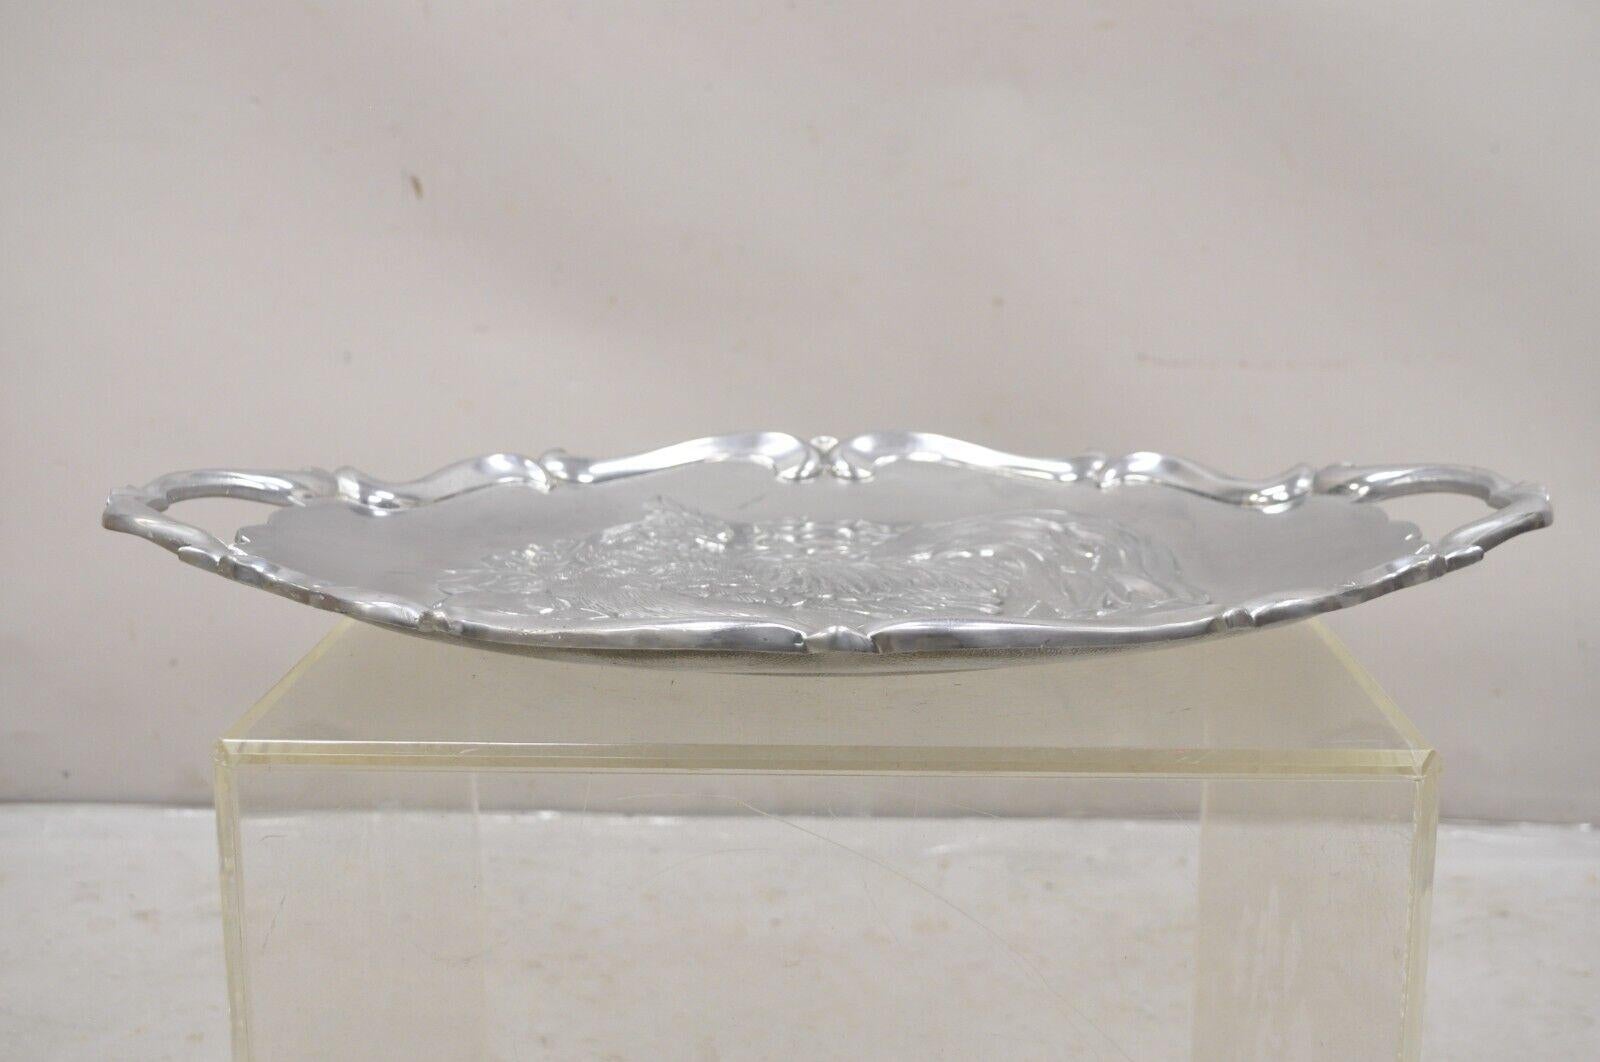 Vintage Lenox Retired Large Rooster Metal Holiday Serving Platter Tray.  Vers la fin du 20e siècle. Dimensions : 2